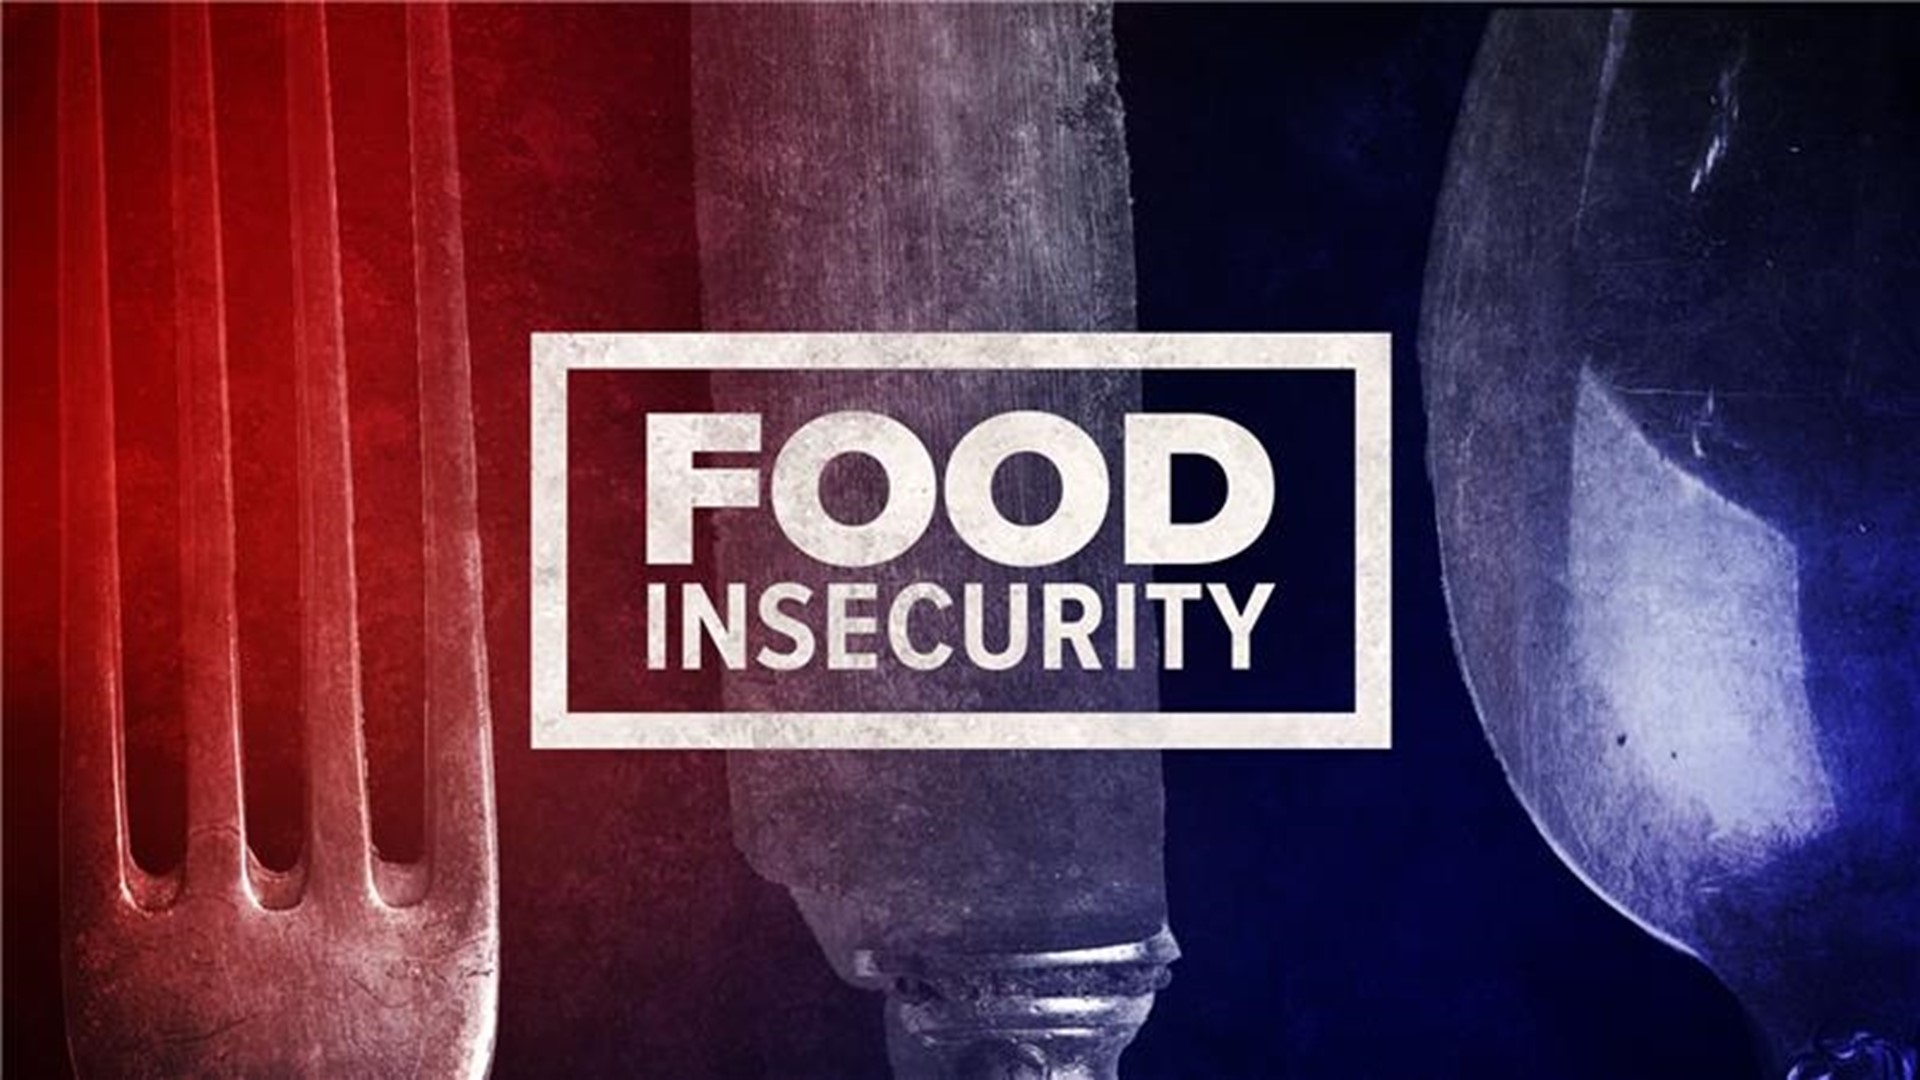 Louisville ranks 6th among its peer cities in food insecurity with 12.9% of residents experiencing it. That’s roughly 80,000 people.